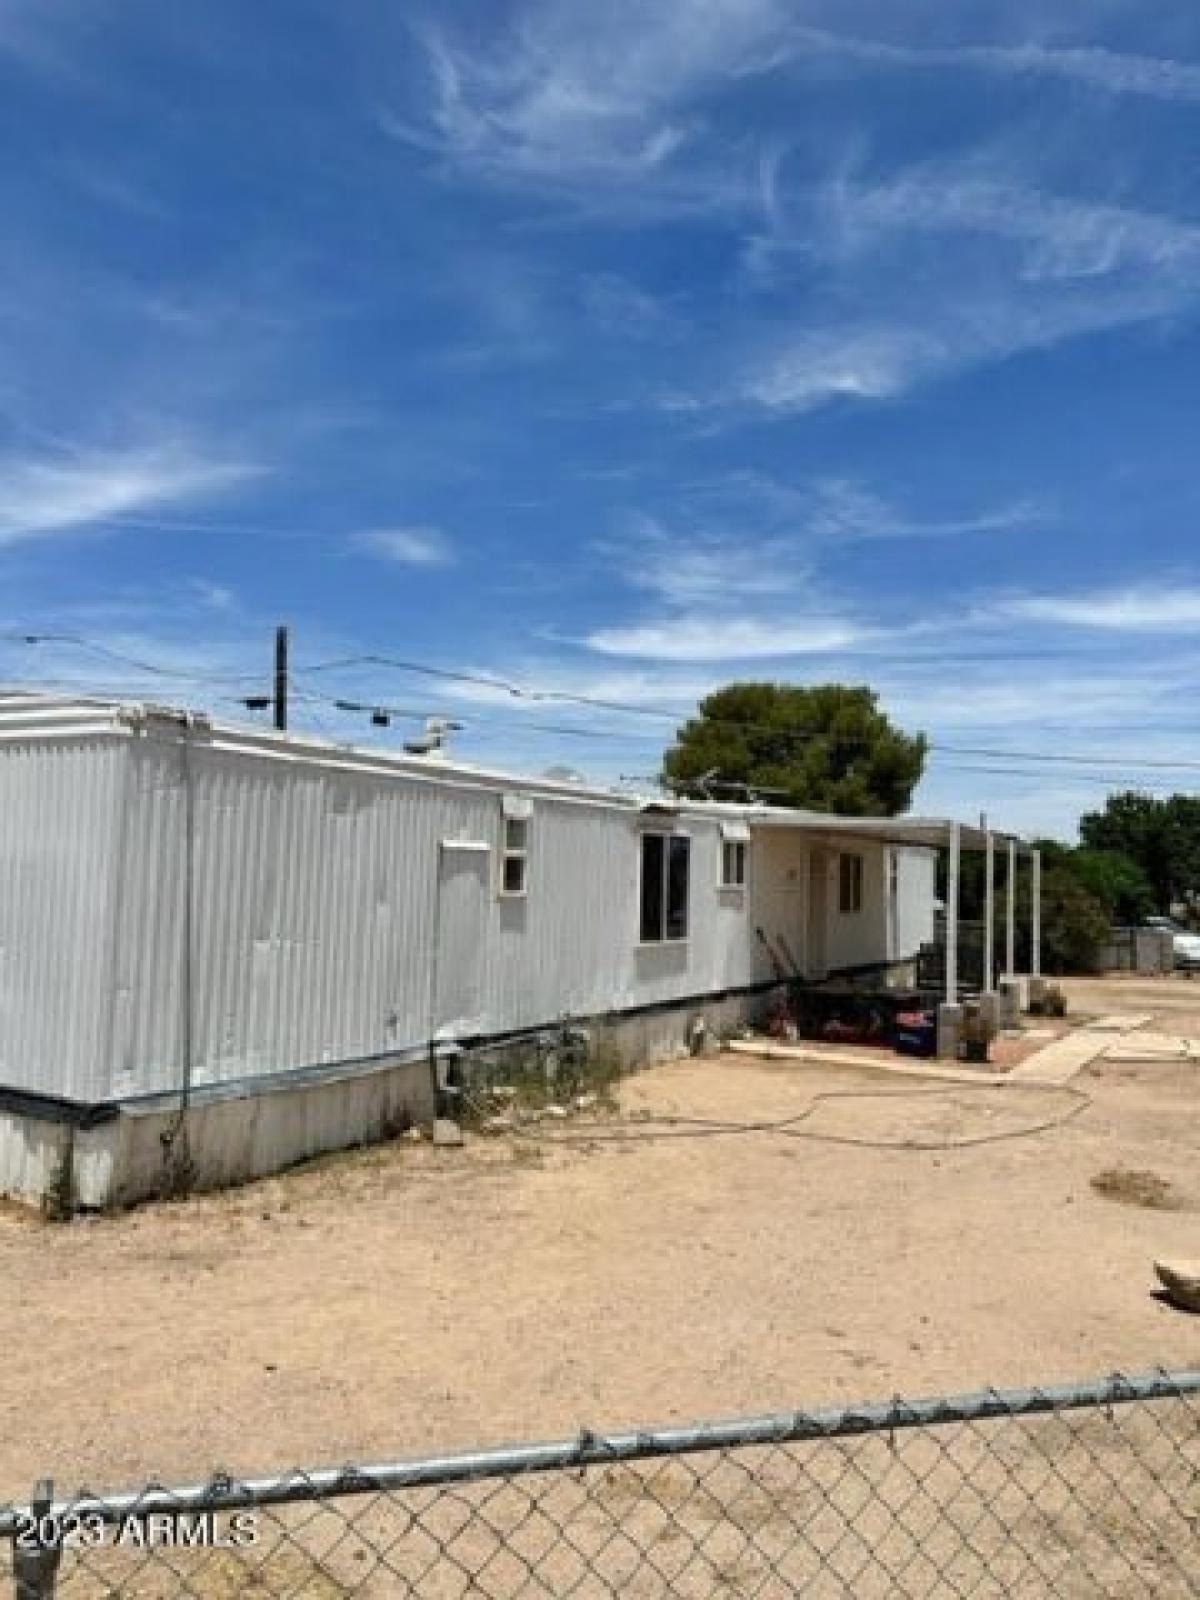 Picture of Home For Sale in Eloy, Arizona, United States